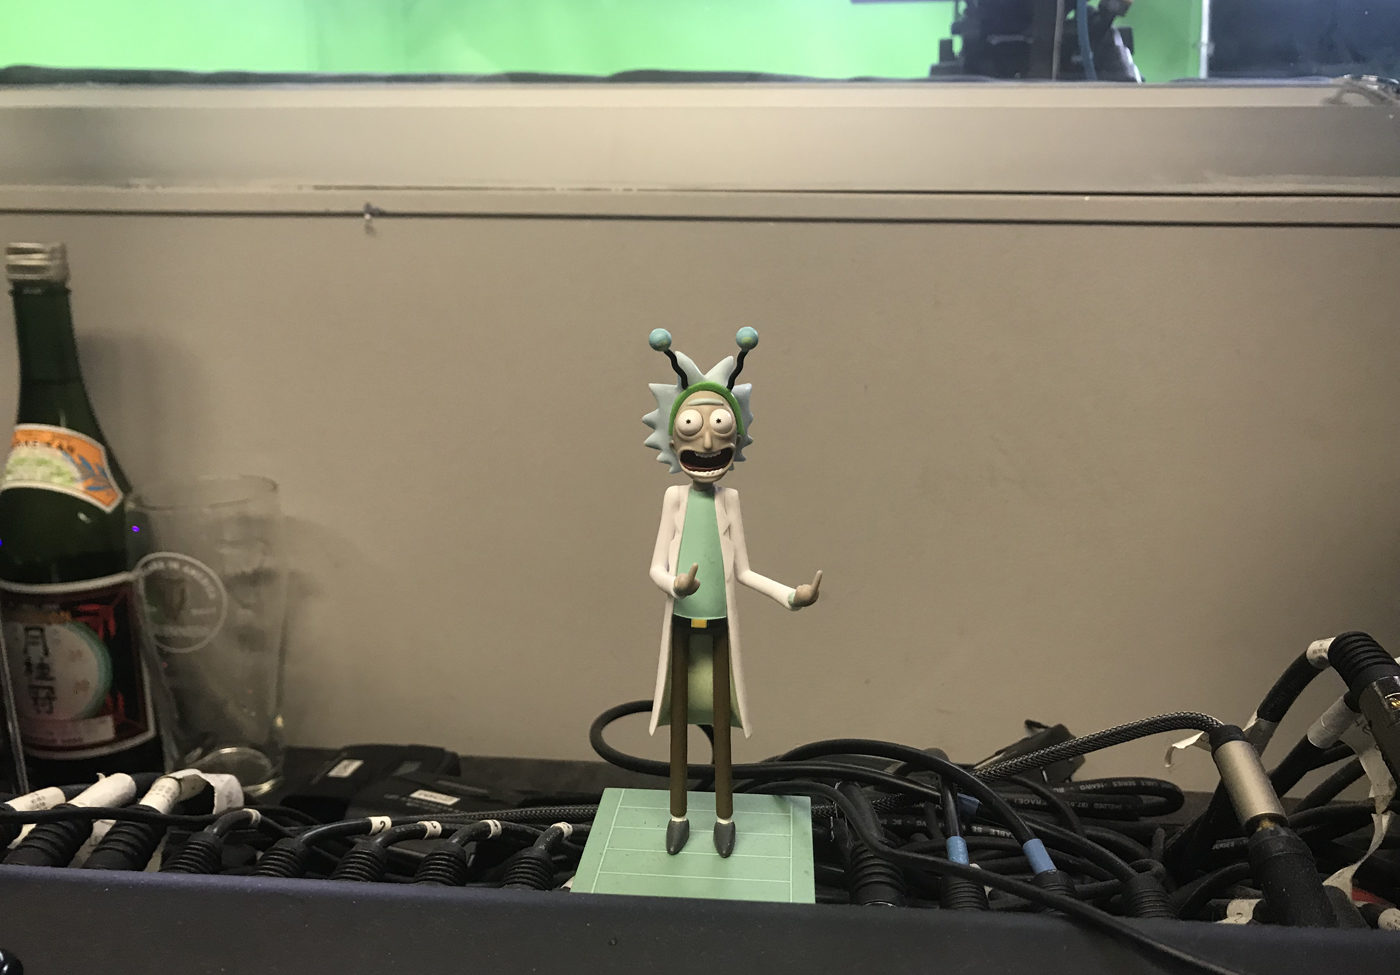 Sabrina Ancona's photo of the Rick and Morty figurine in the StarTalk Playing with Science studio.